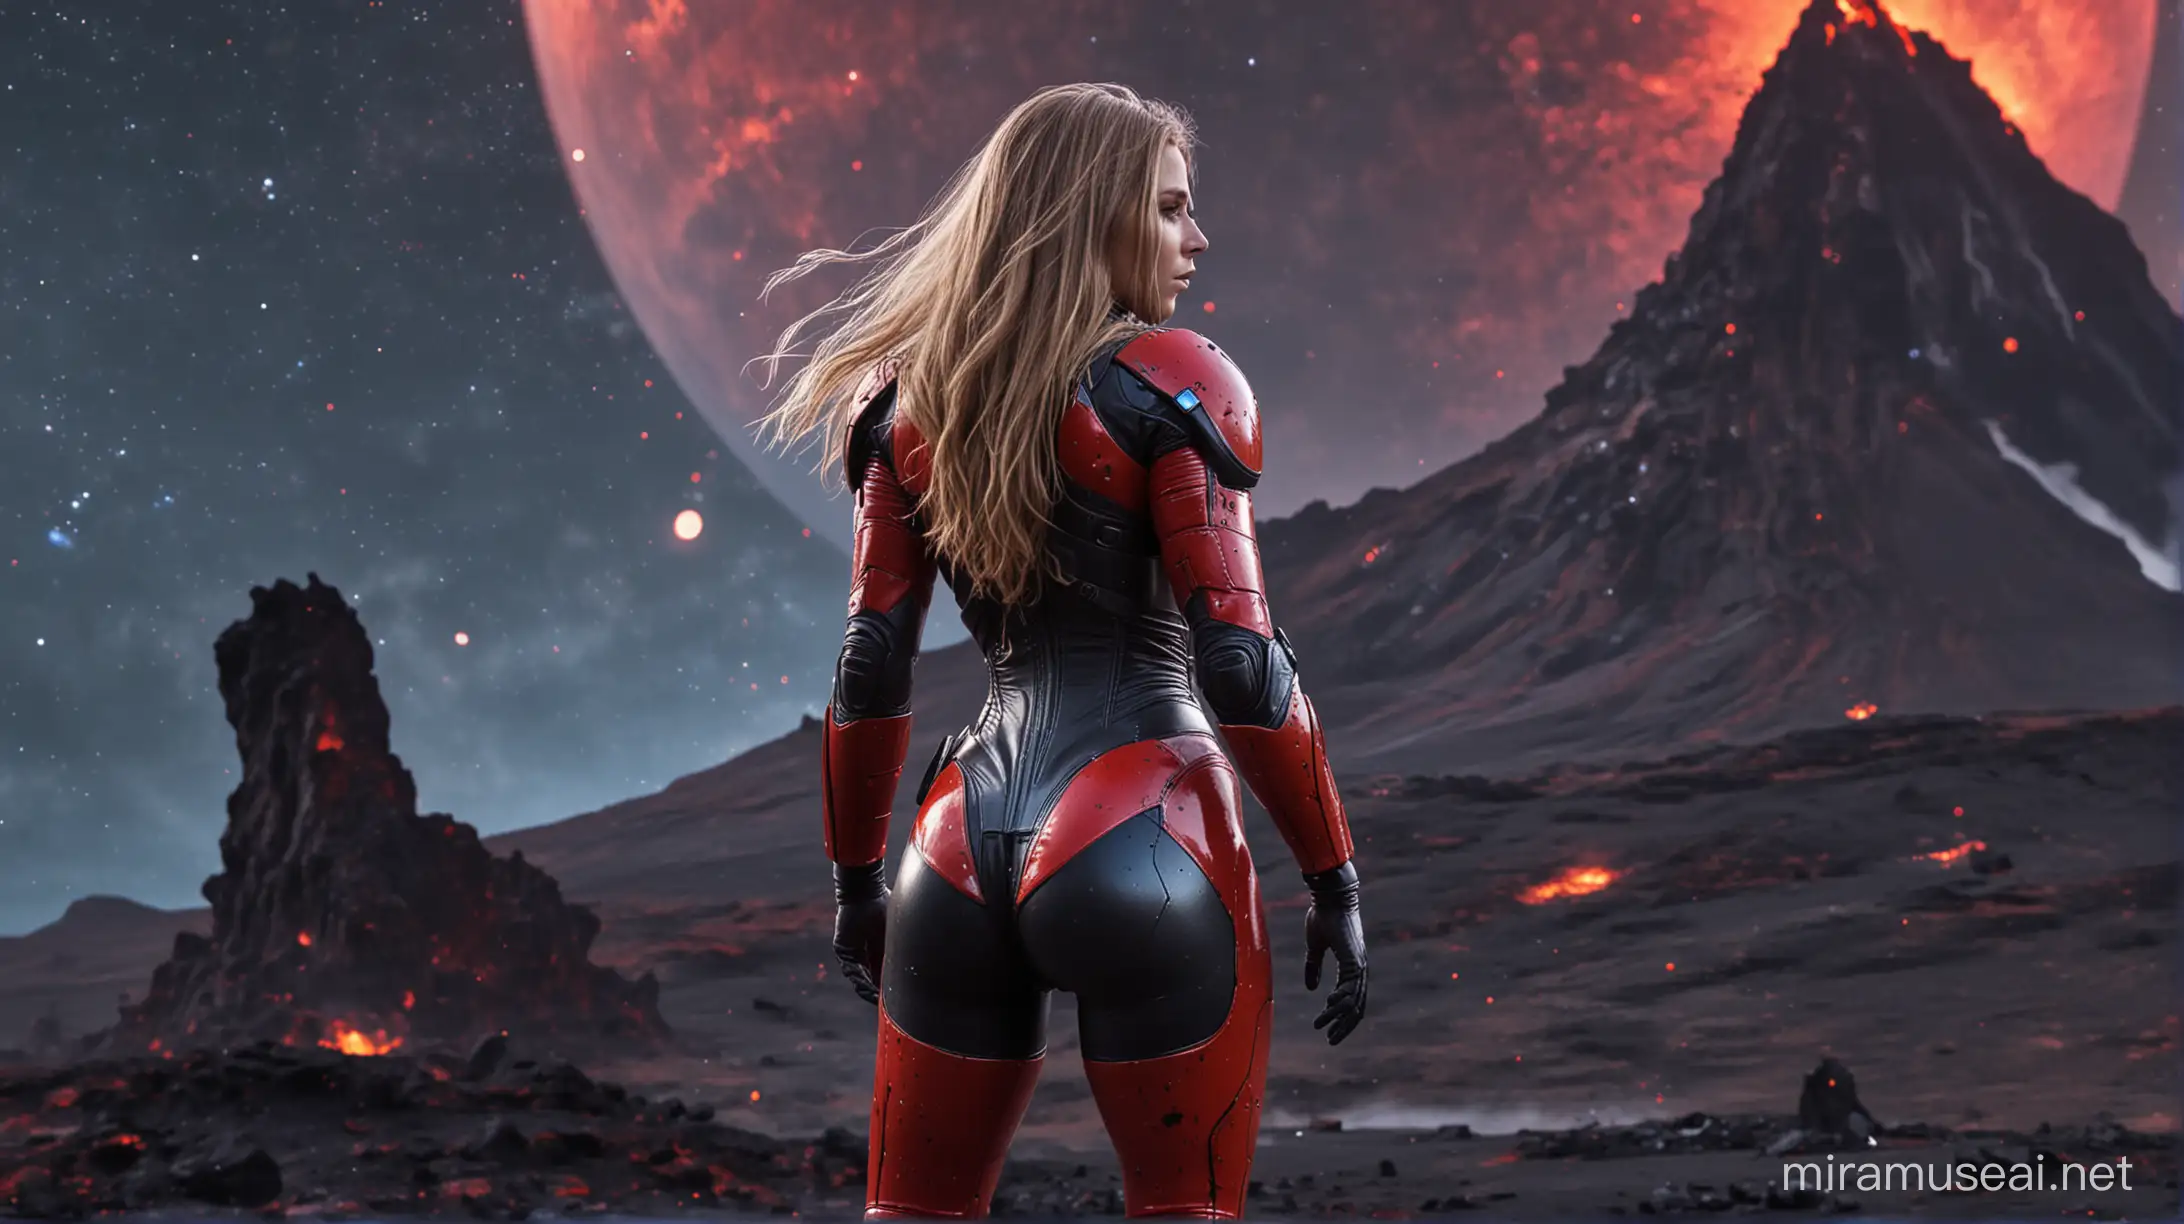 space nordic girl, slim, long hair, wild hair, full body, fitness model, from behind, round butt, wide hips, huge tits, tight spacesuit, armored spacesuit, black and blood red spacesuit, small ultramarine glowing parts on spacesuit, alien volcano planet, colorful galaxie on the sky